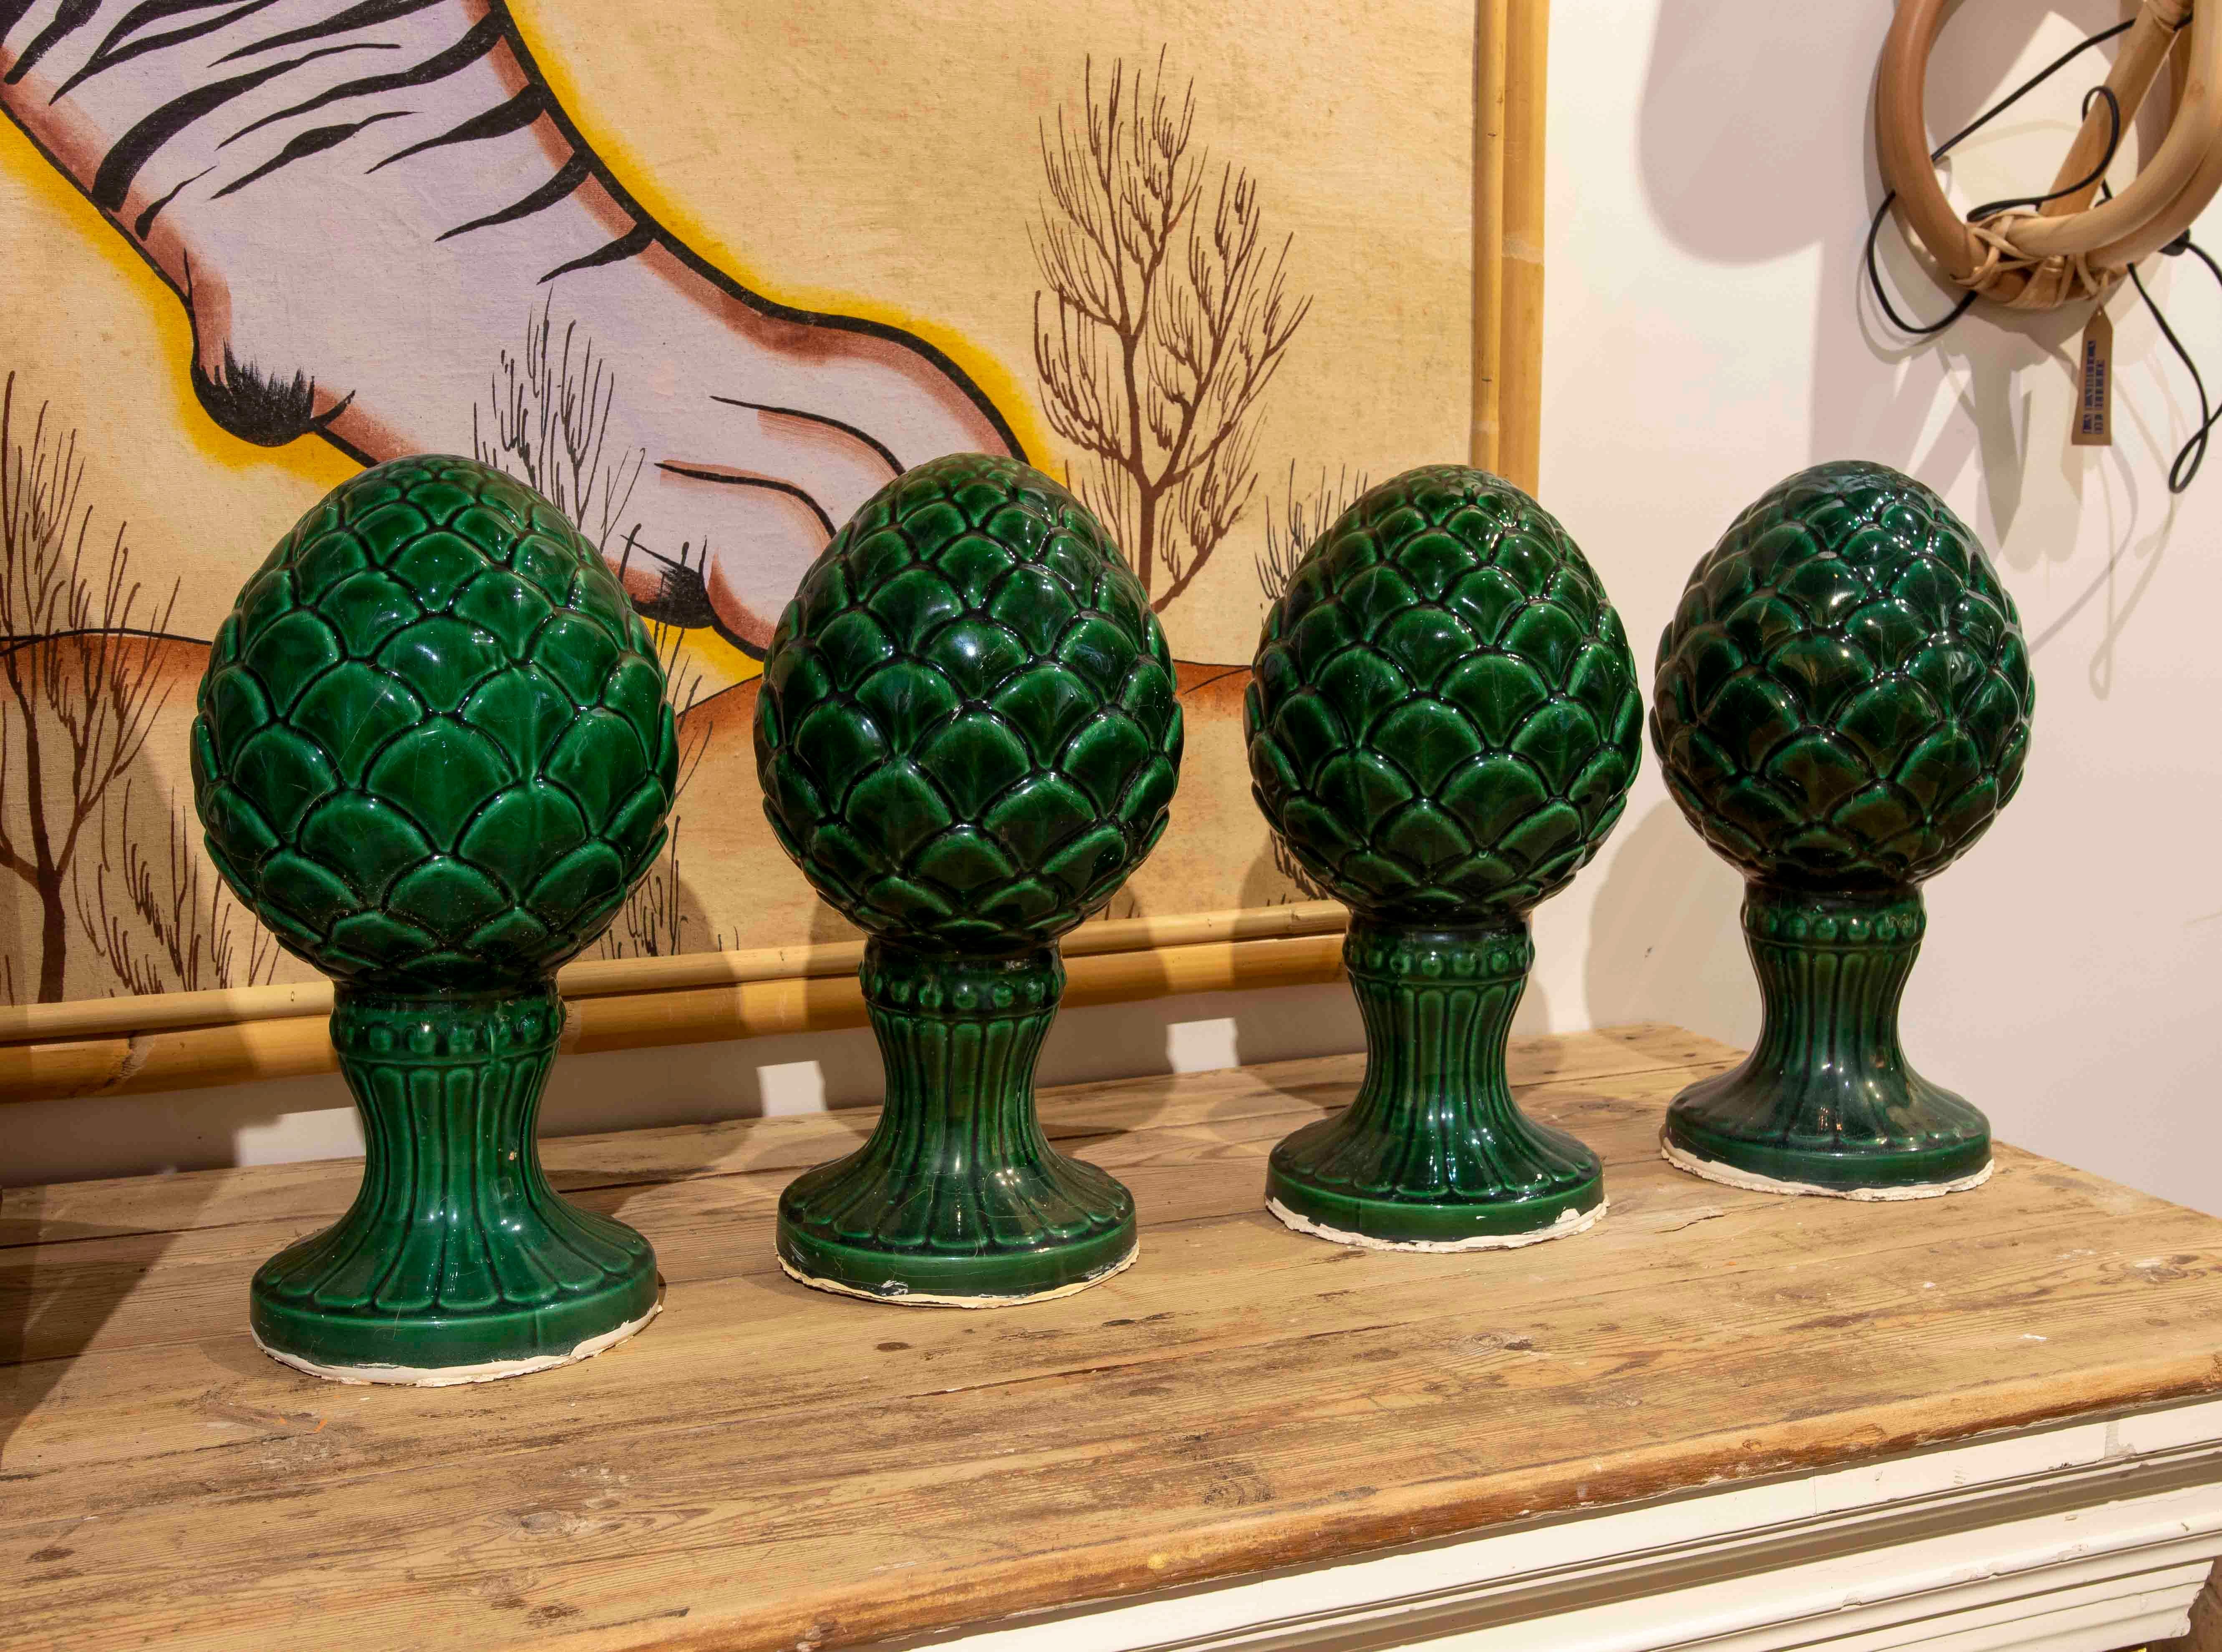 Set of Four Green Glazed Ceramic Finials in the Shape of Pineapples.